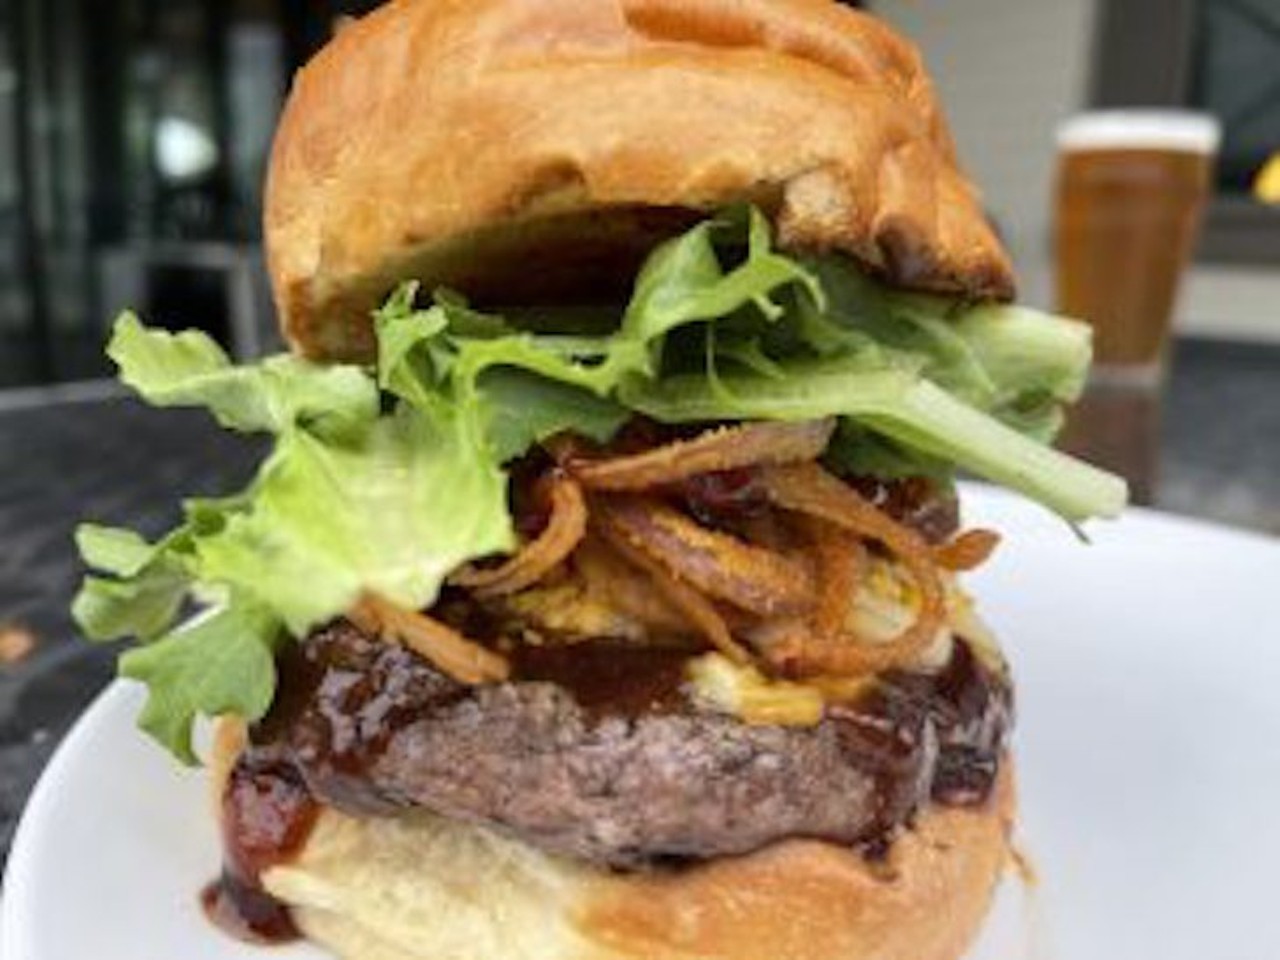 Bristol is offering different burgers at different locations. At their East location you&#146;ll find the Cajun Jalapeno Burger; at Highlands you&#146;ll find the Optimus Prime Rib Burger and the Going Hogging Burger; and Downtown you can get the Bourbon BBQ Burger or the Smoked Cheddar Bacon Burger.